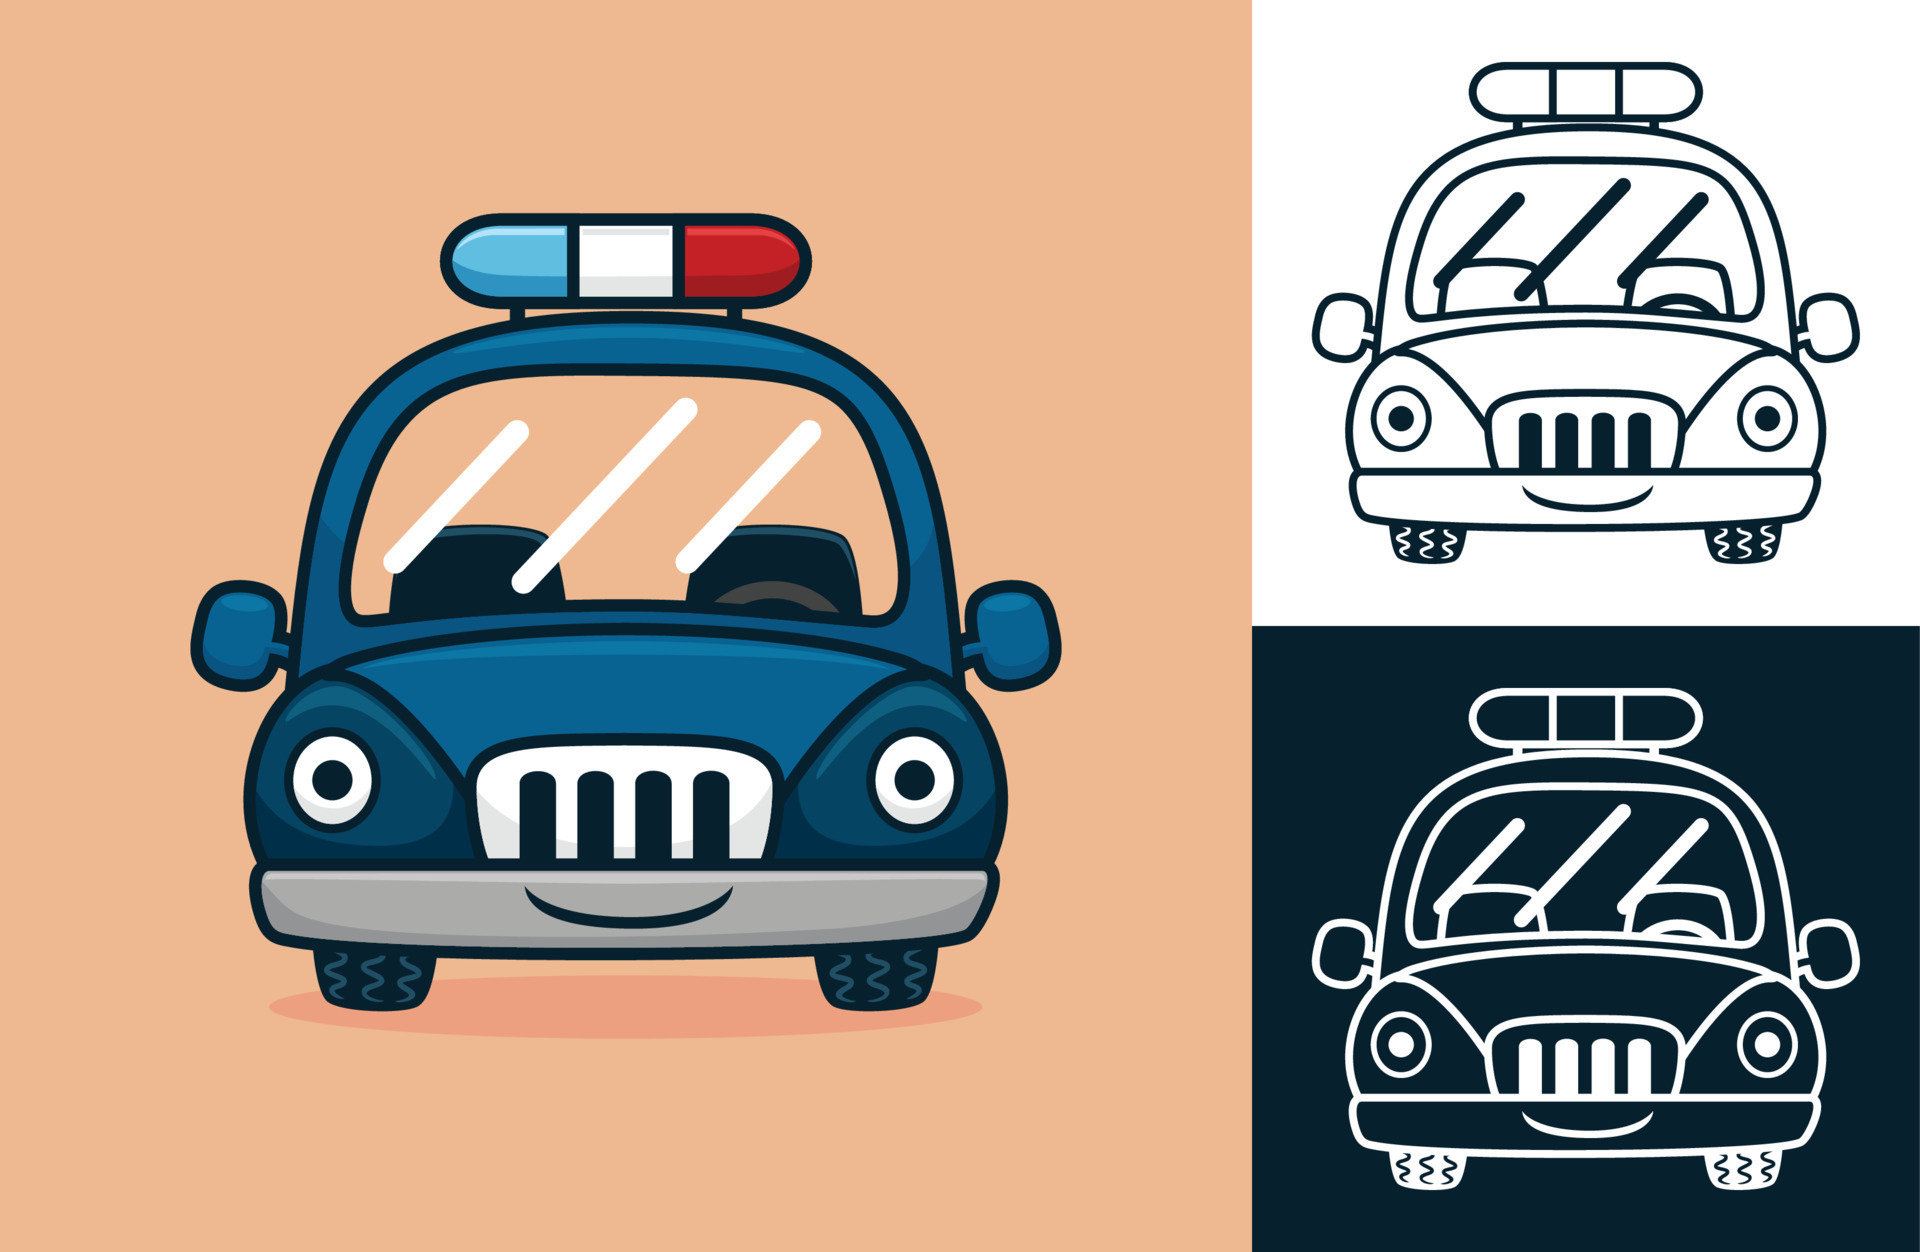 Funny police car. Vector cartoon illustration in flat icon style